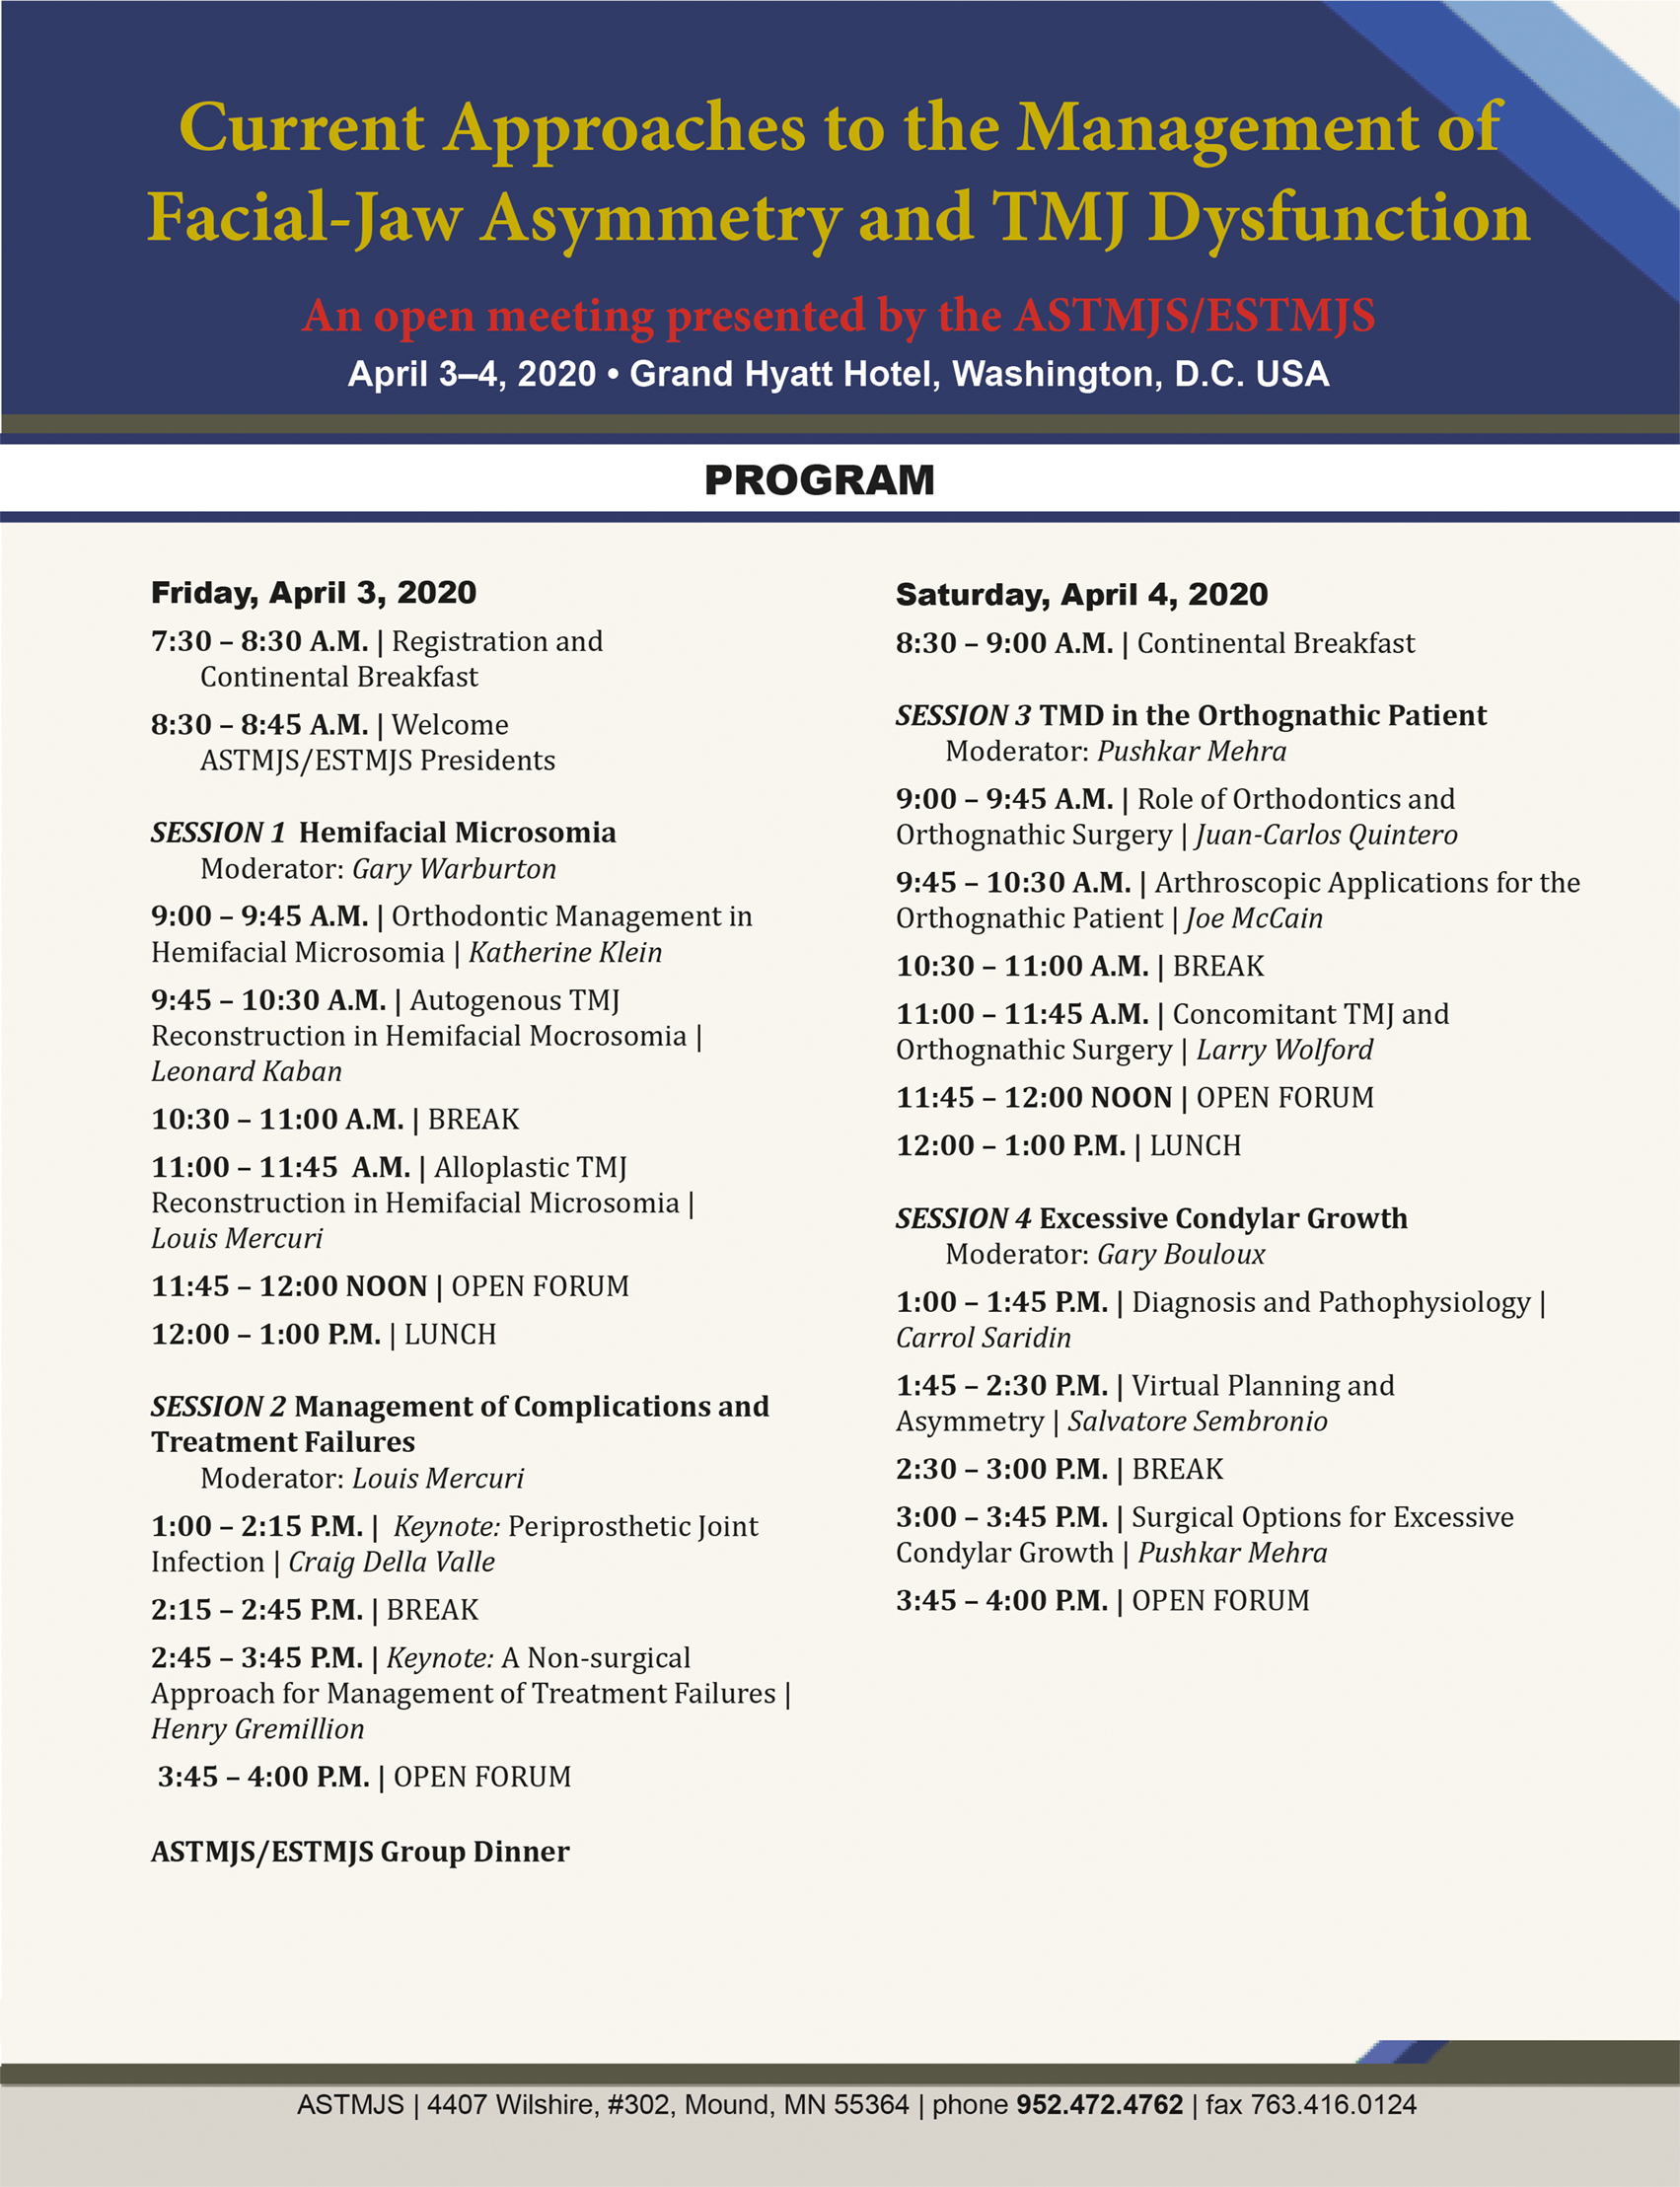 A program for the 2 0 1 9 conference.